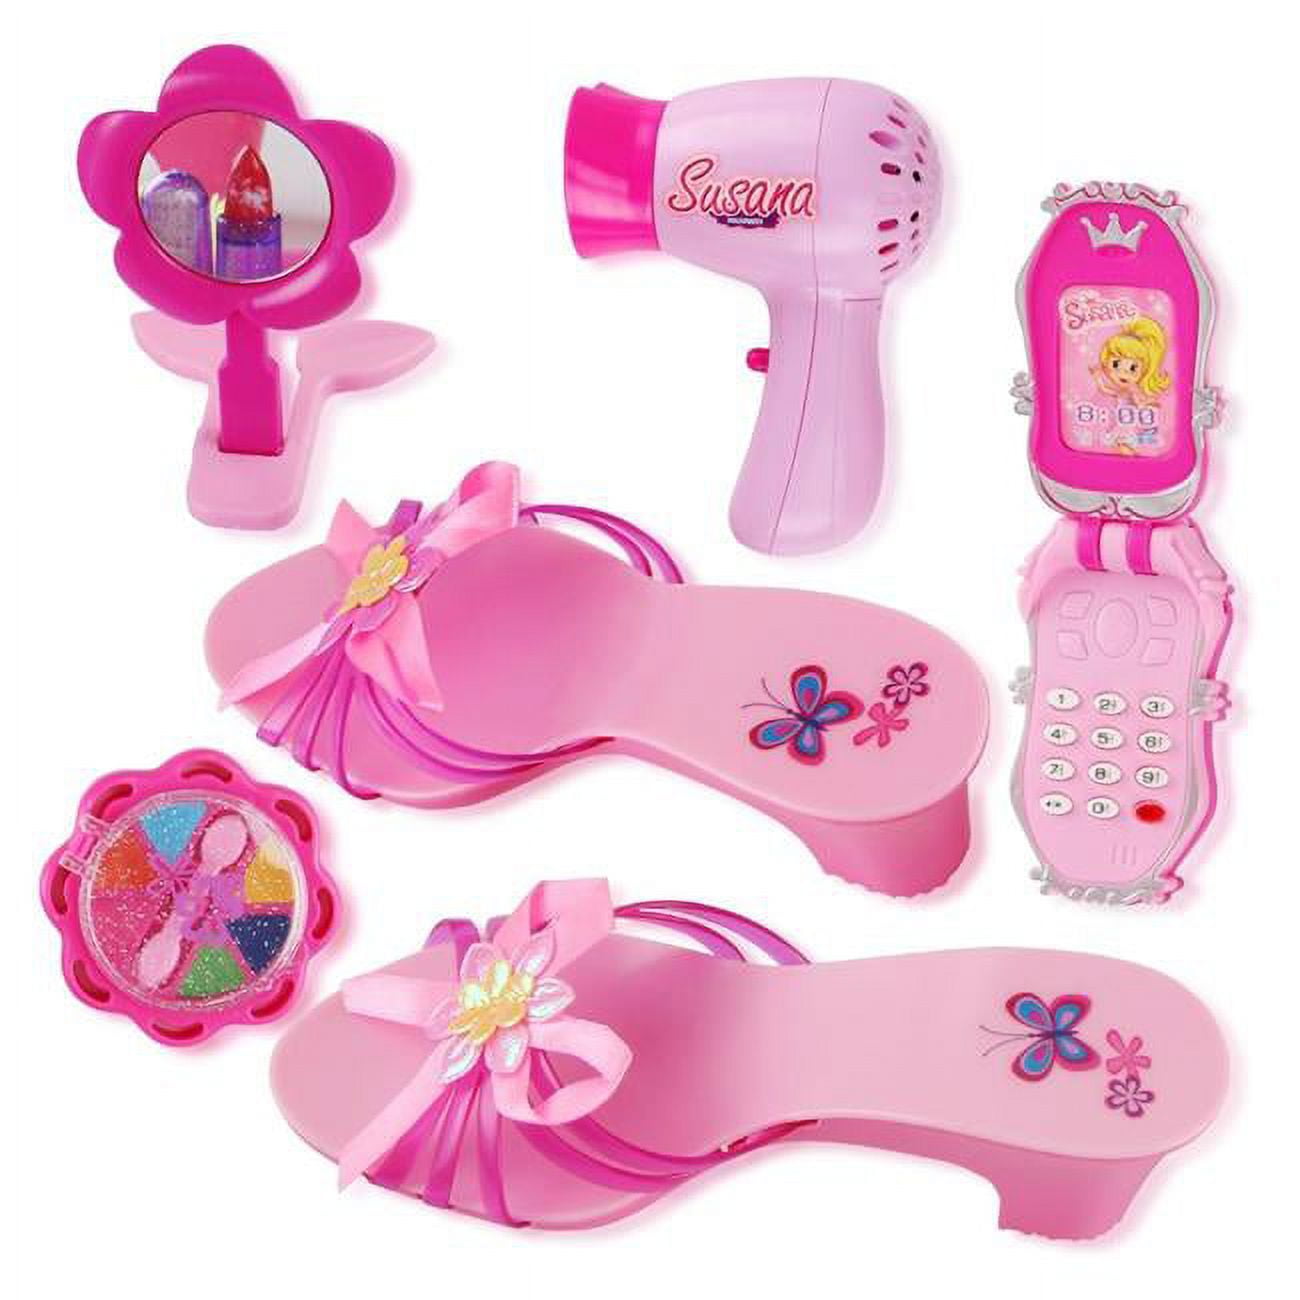 Psbe042 Princess Beauty Play Set With Hair Dryer, Shoes & Accessories